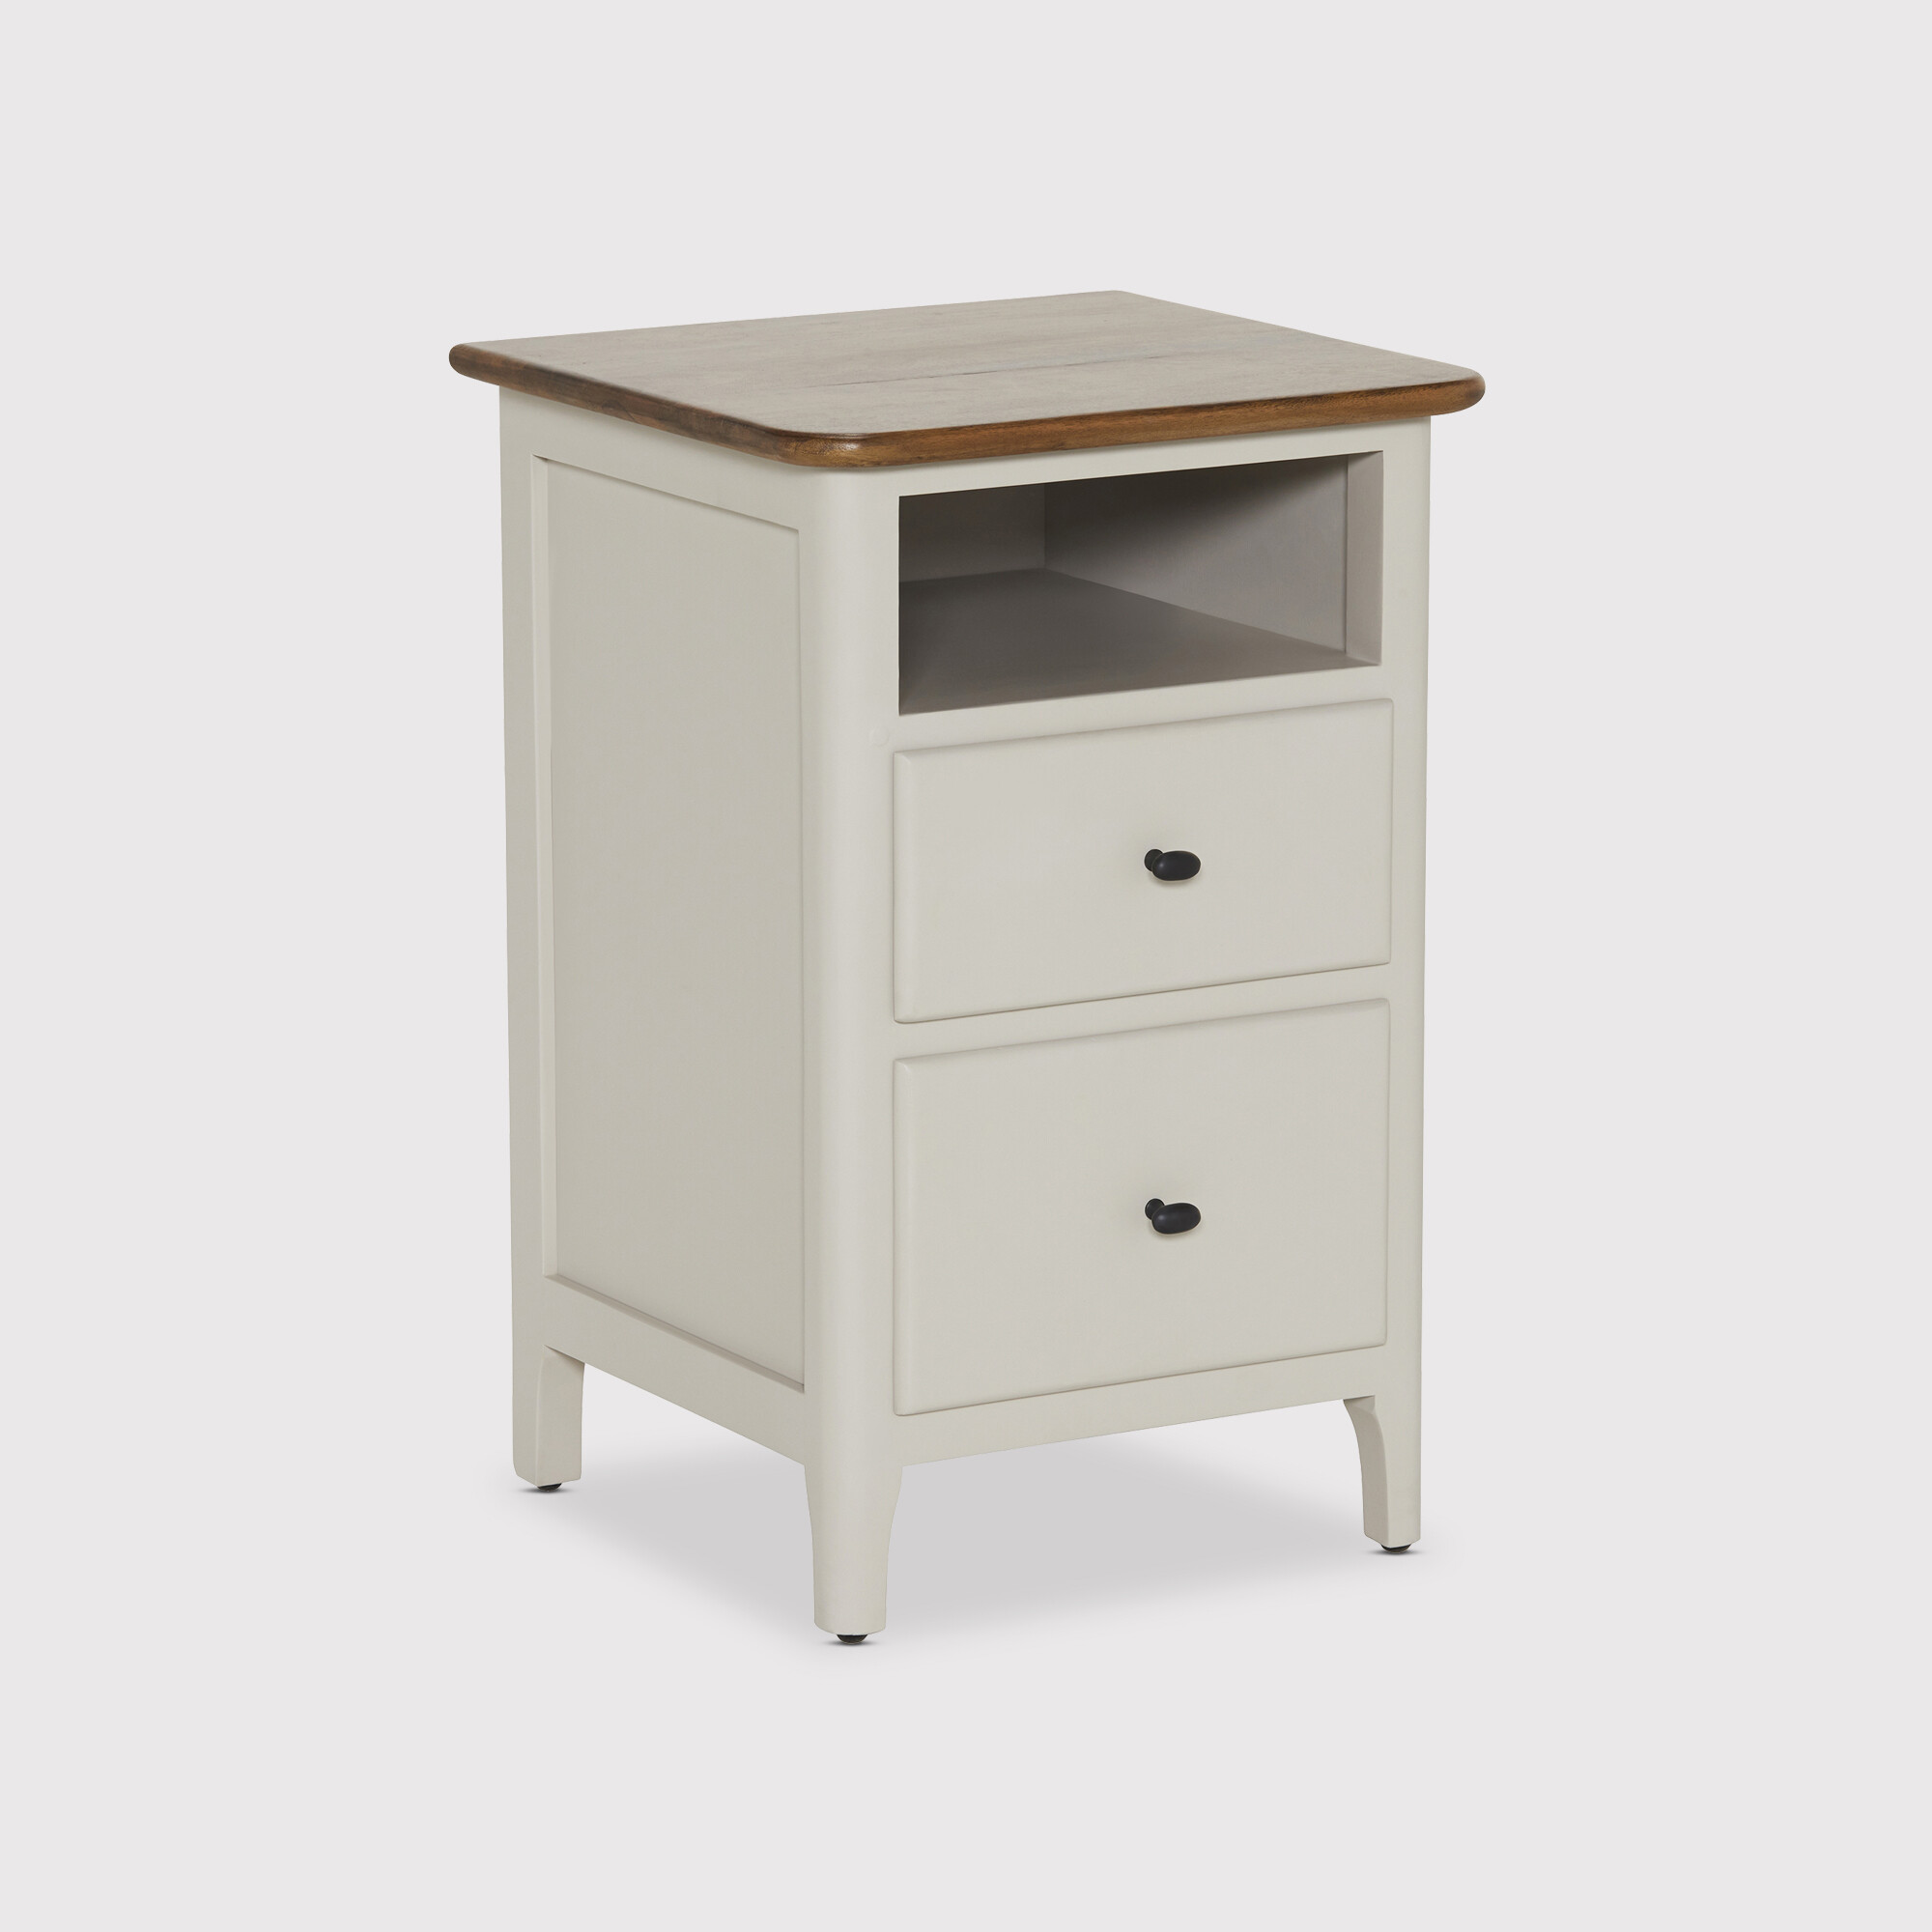 Mara Bedside 2 Drawer With Open Shelf Unit Table, Neutral Wood | Barker & Stonehouse